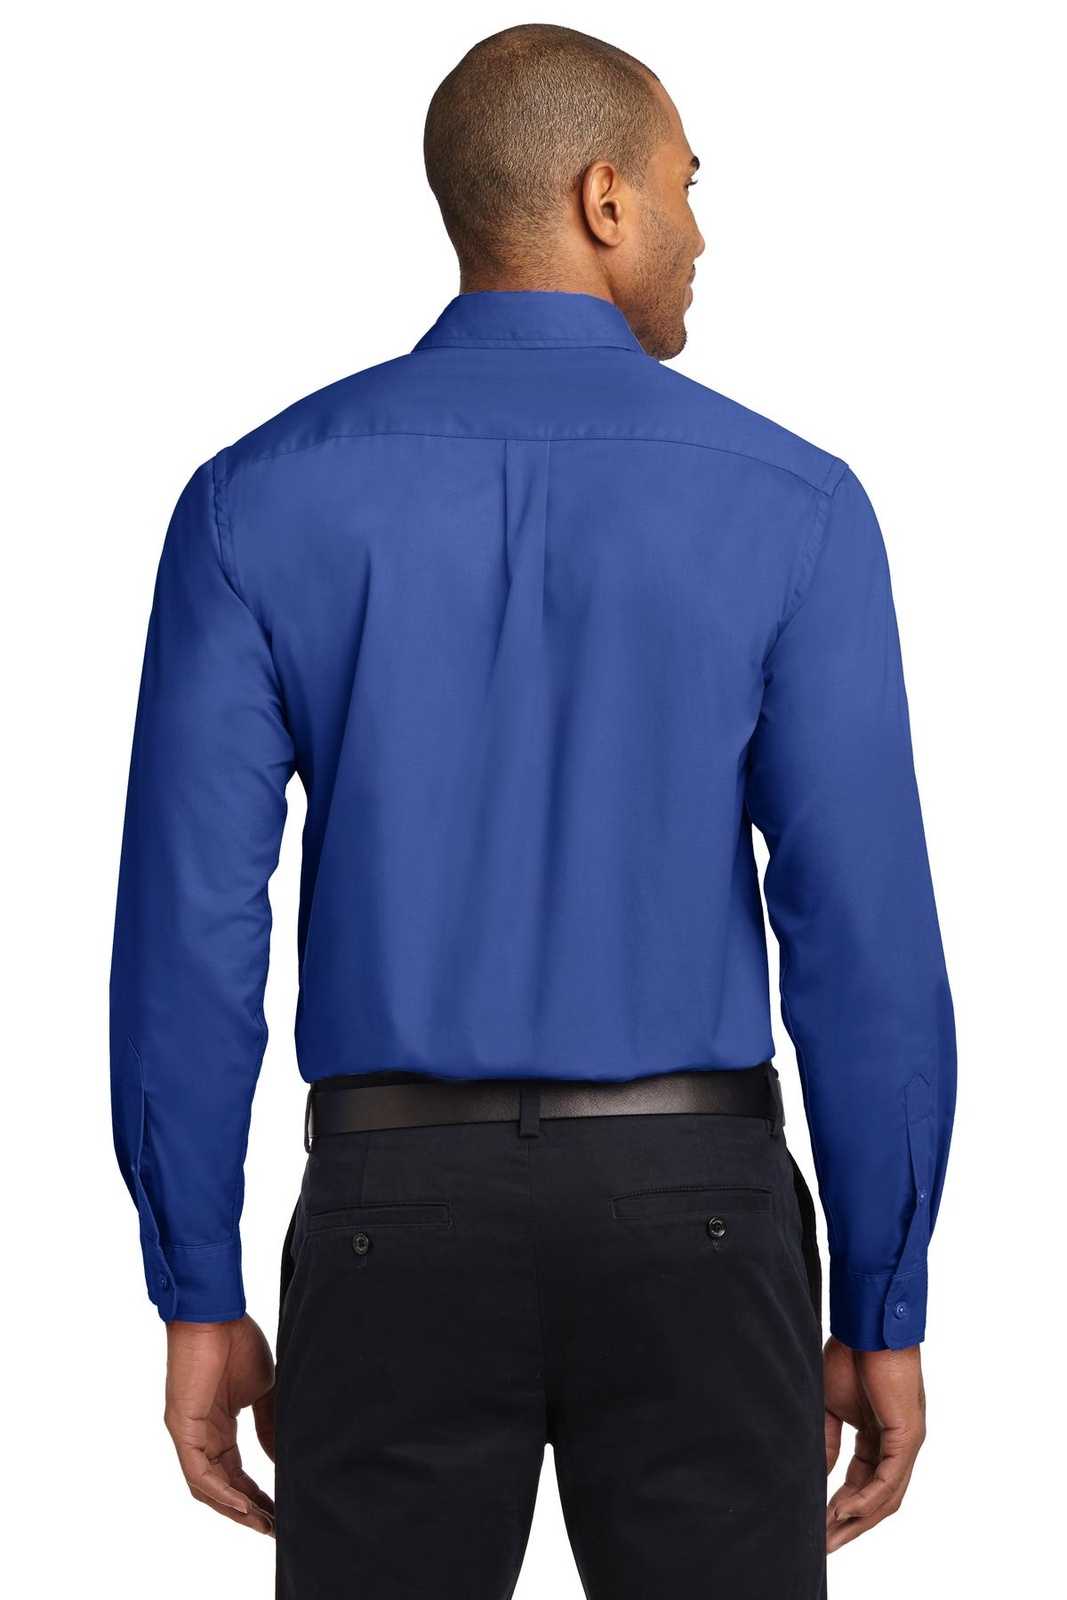 Port Authority TLS608 Tall Long Sleeve Easy Care Shirt - Royal Classic Navy - HIT a Double - 2